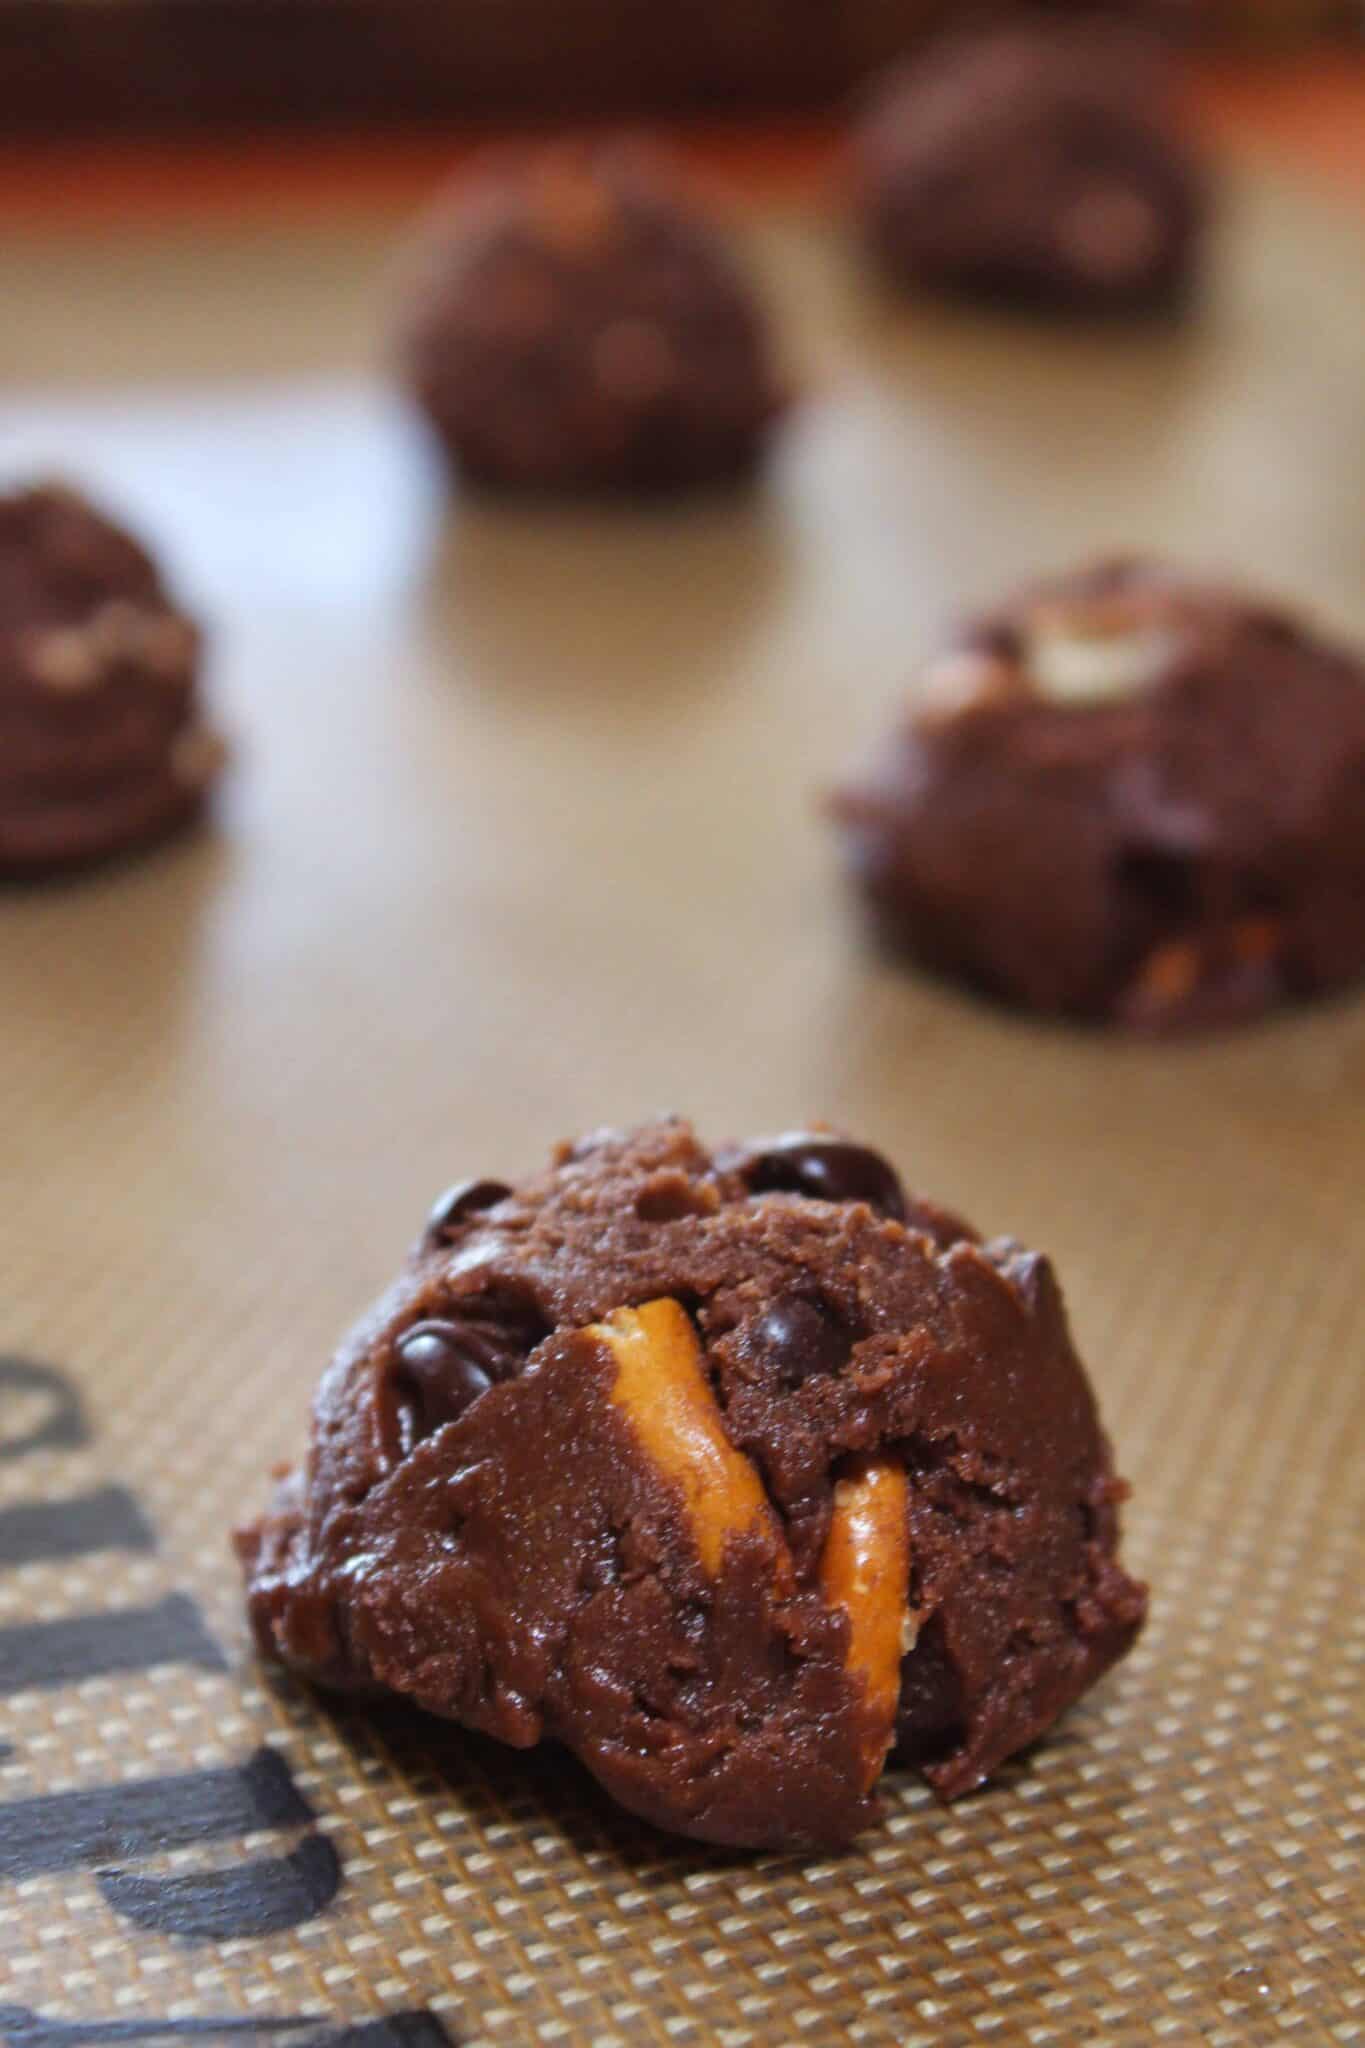 Loaded Brownie Pretzel Cookies Recipe featured by top US cookie blogger, Practically Homemade